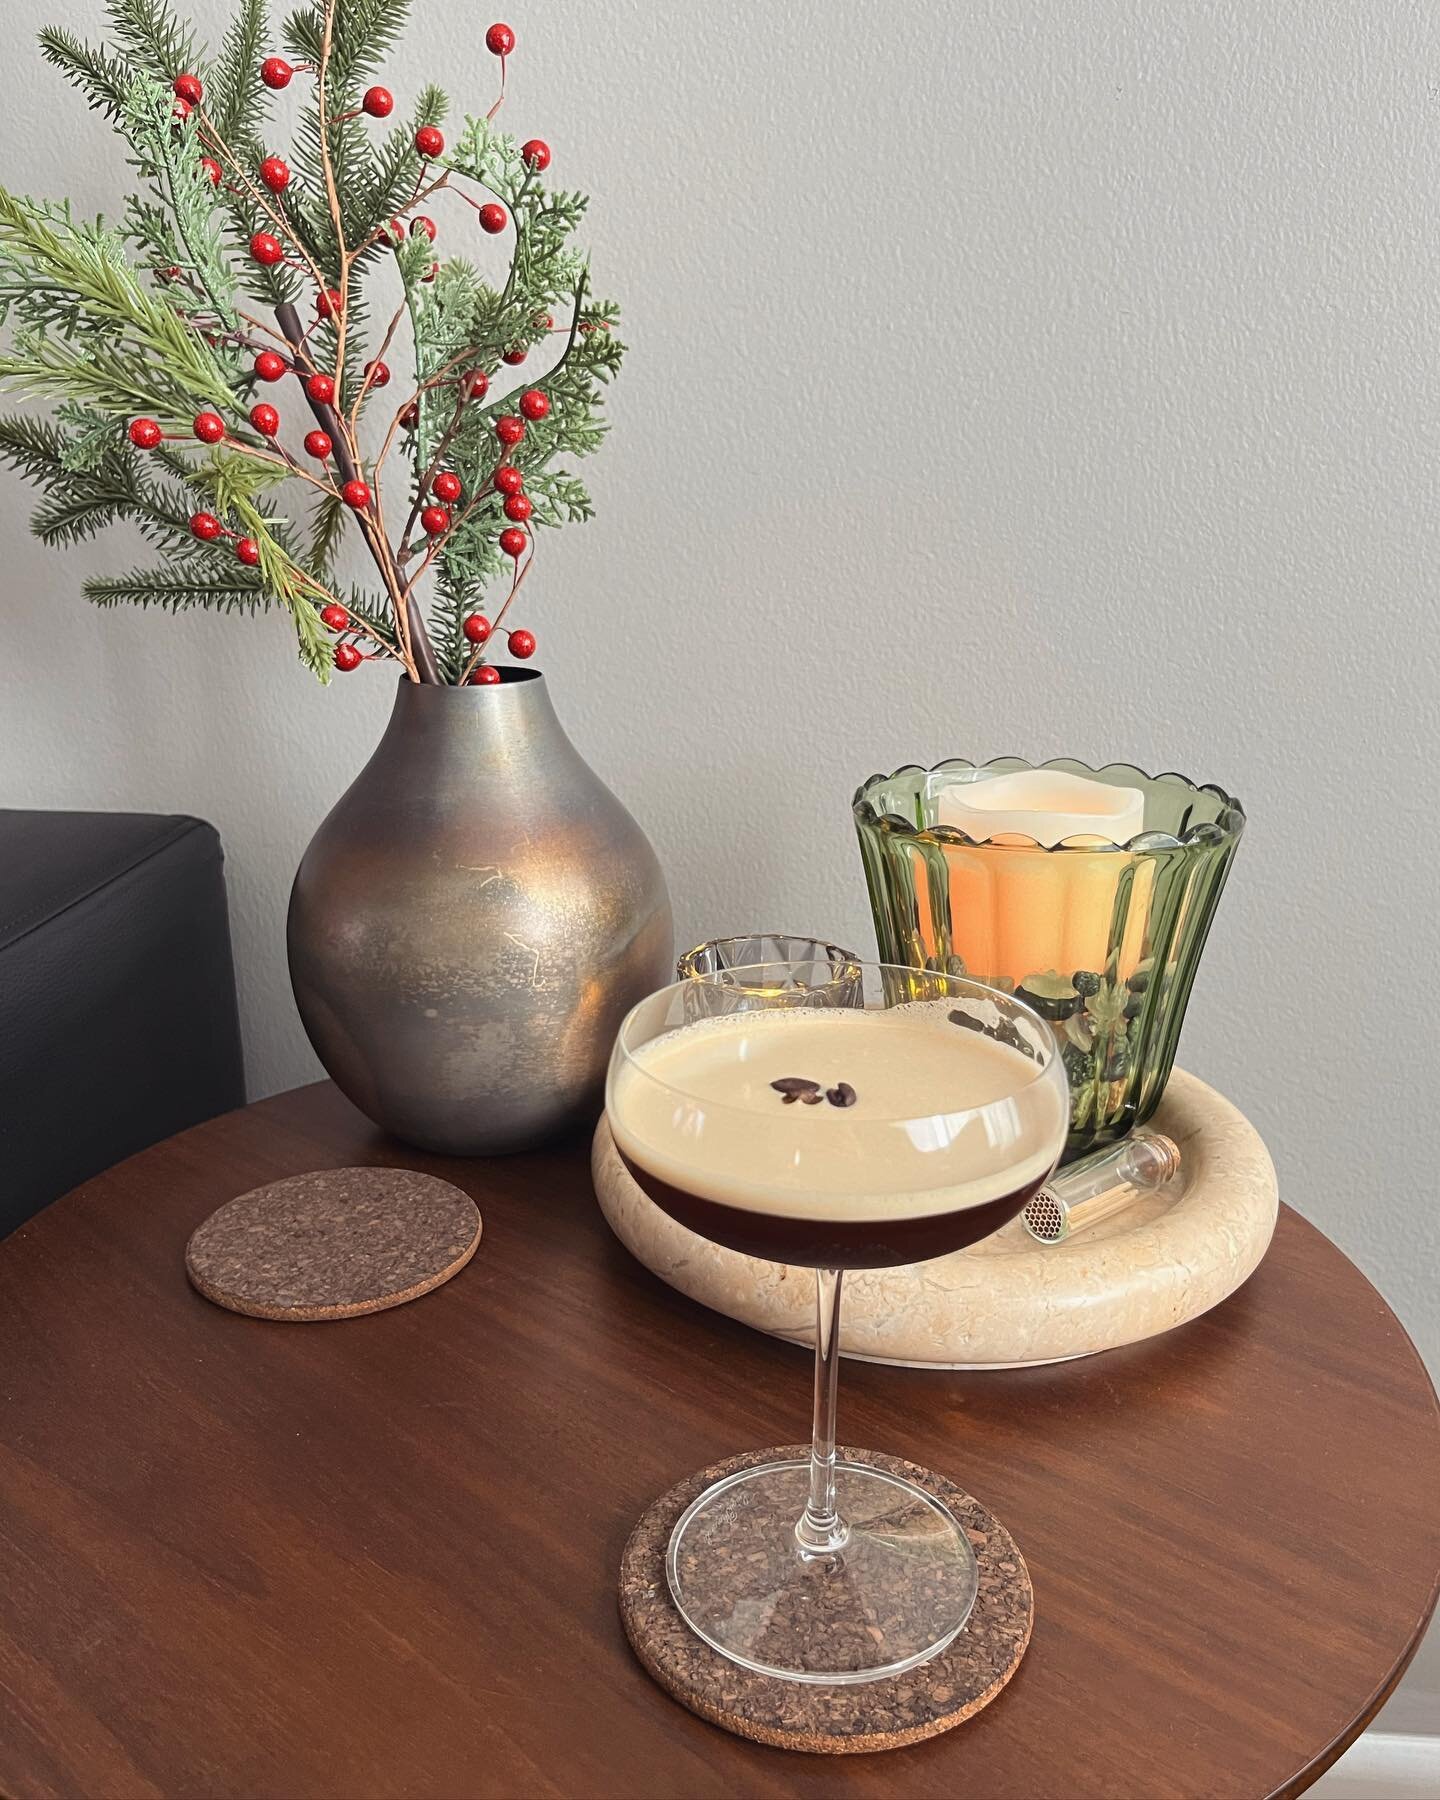 Christmas cocktails!! Is there anything merrier? Here are some of my favs from this holiday season 🥃🎄🥂

❄️❄️❄️

1. Tequila Espresso Martini 

&bull;1 oz freshly brewed espresso (1 shot of espresso)
&bull;2 oz silver tequila
&bull;&frac12; oz Kahlu